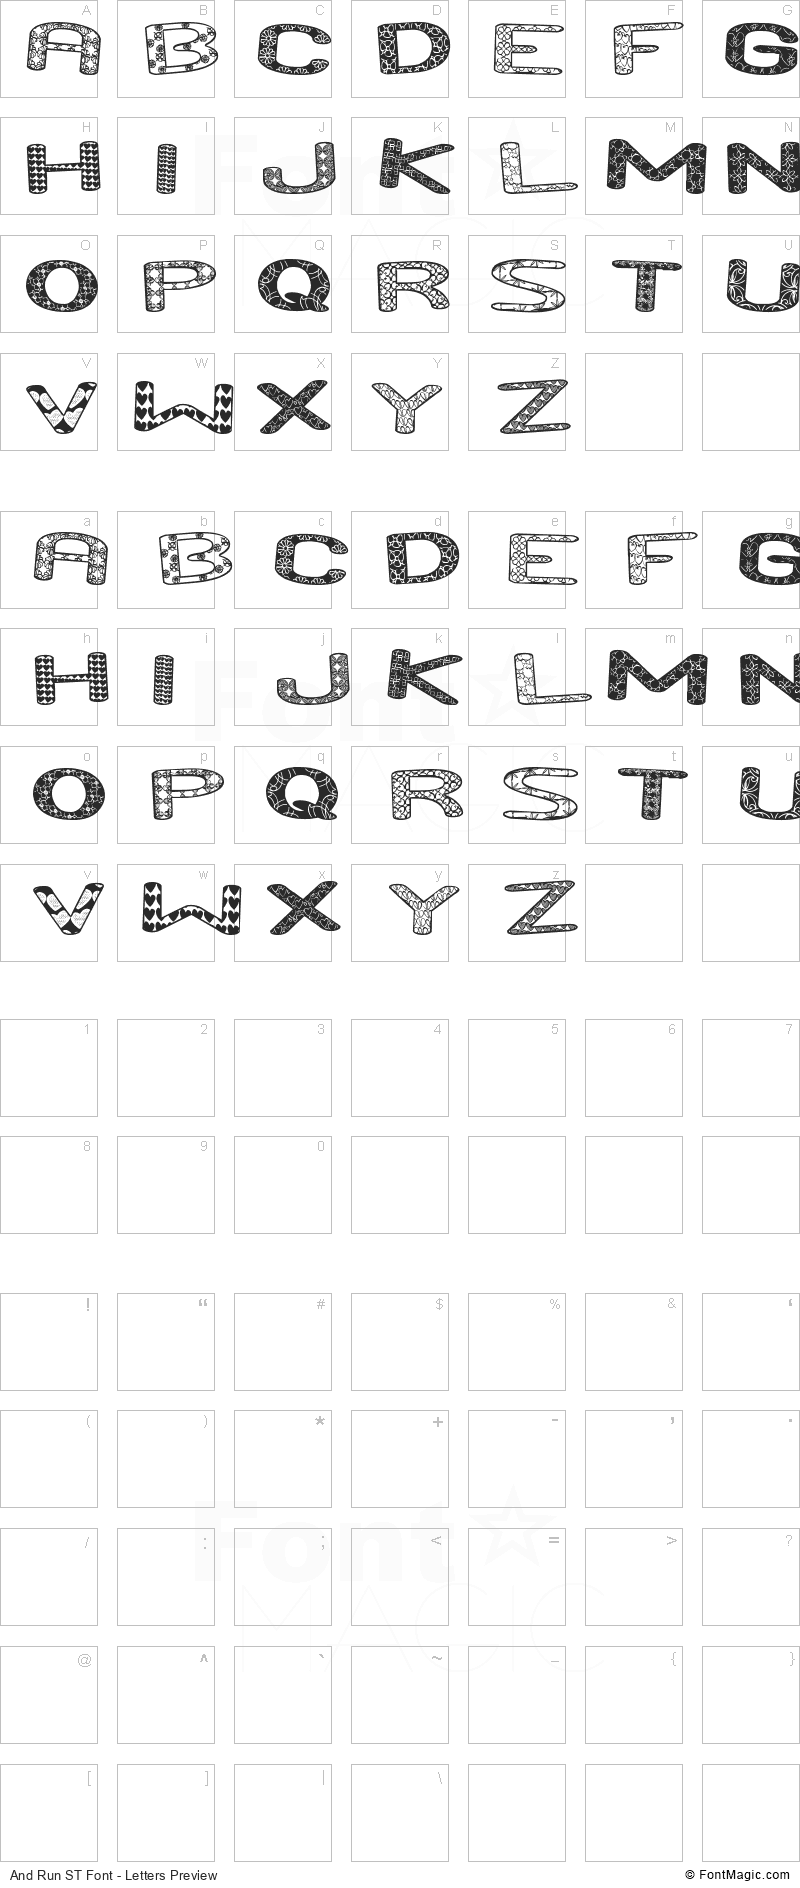 And Run ST Font - All Latters Preview Chart